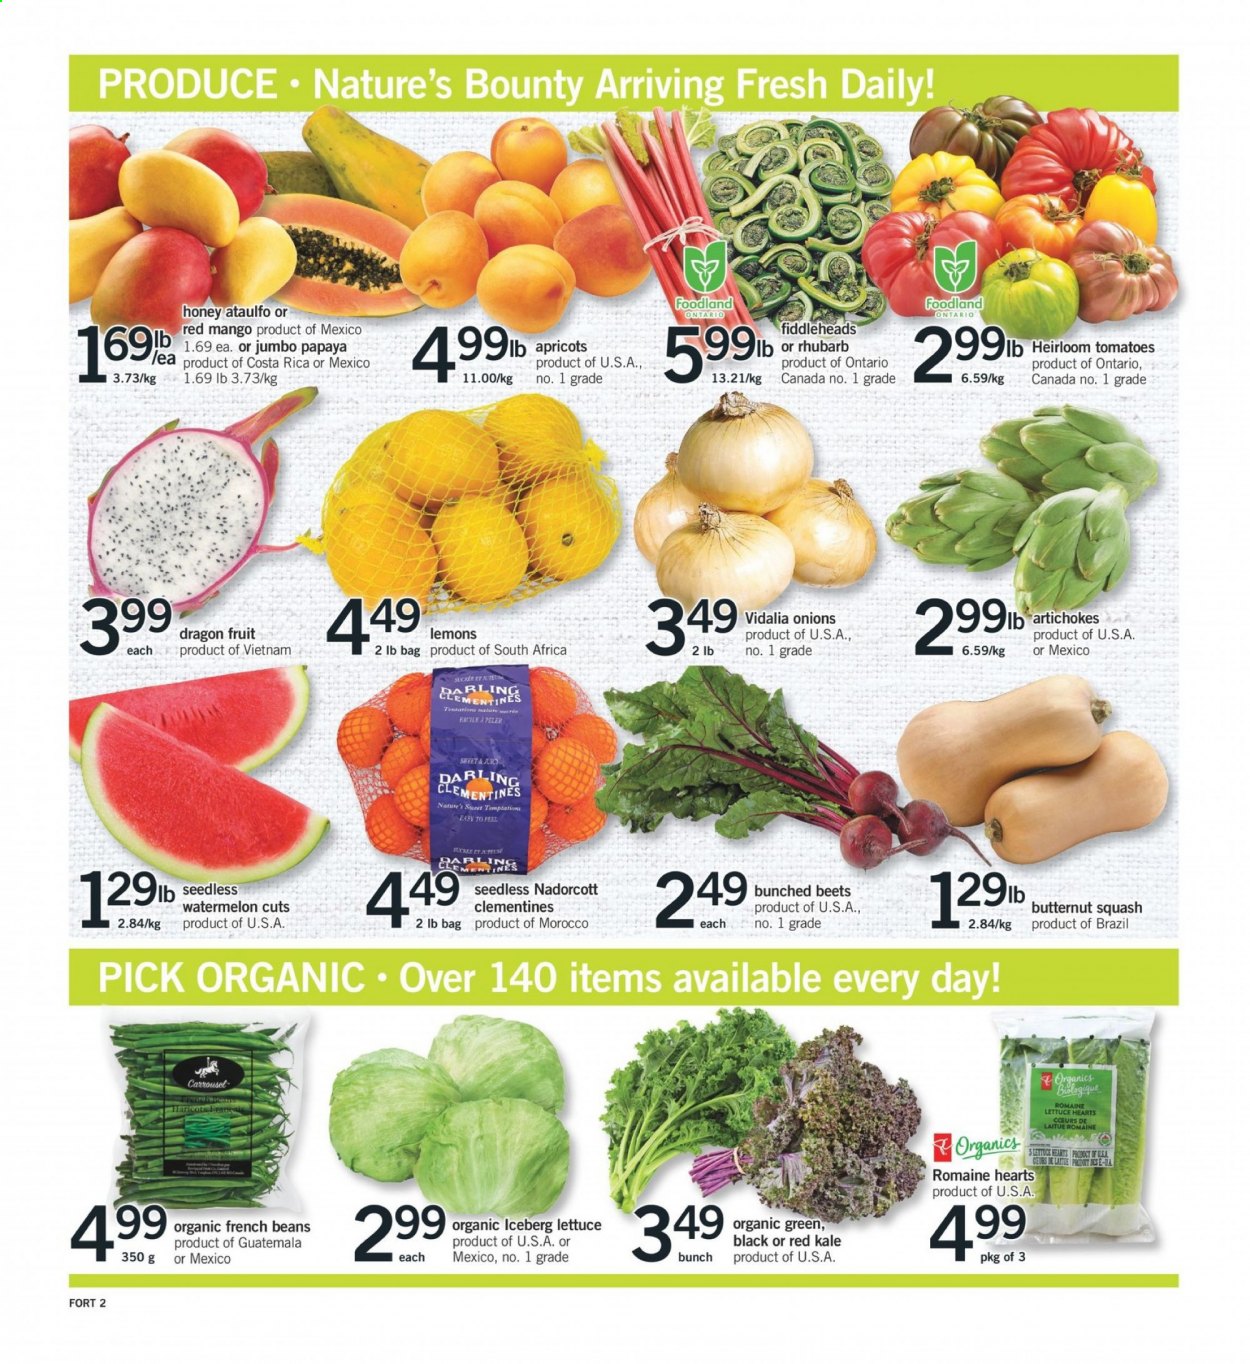 thumbnail - Circulaire Fortinos - 13 Mai 2021 - 19 Mai 2021 - Produits soldés - iceberg, haricots, butternut, dragon, clémentines. Page 3.